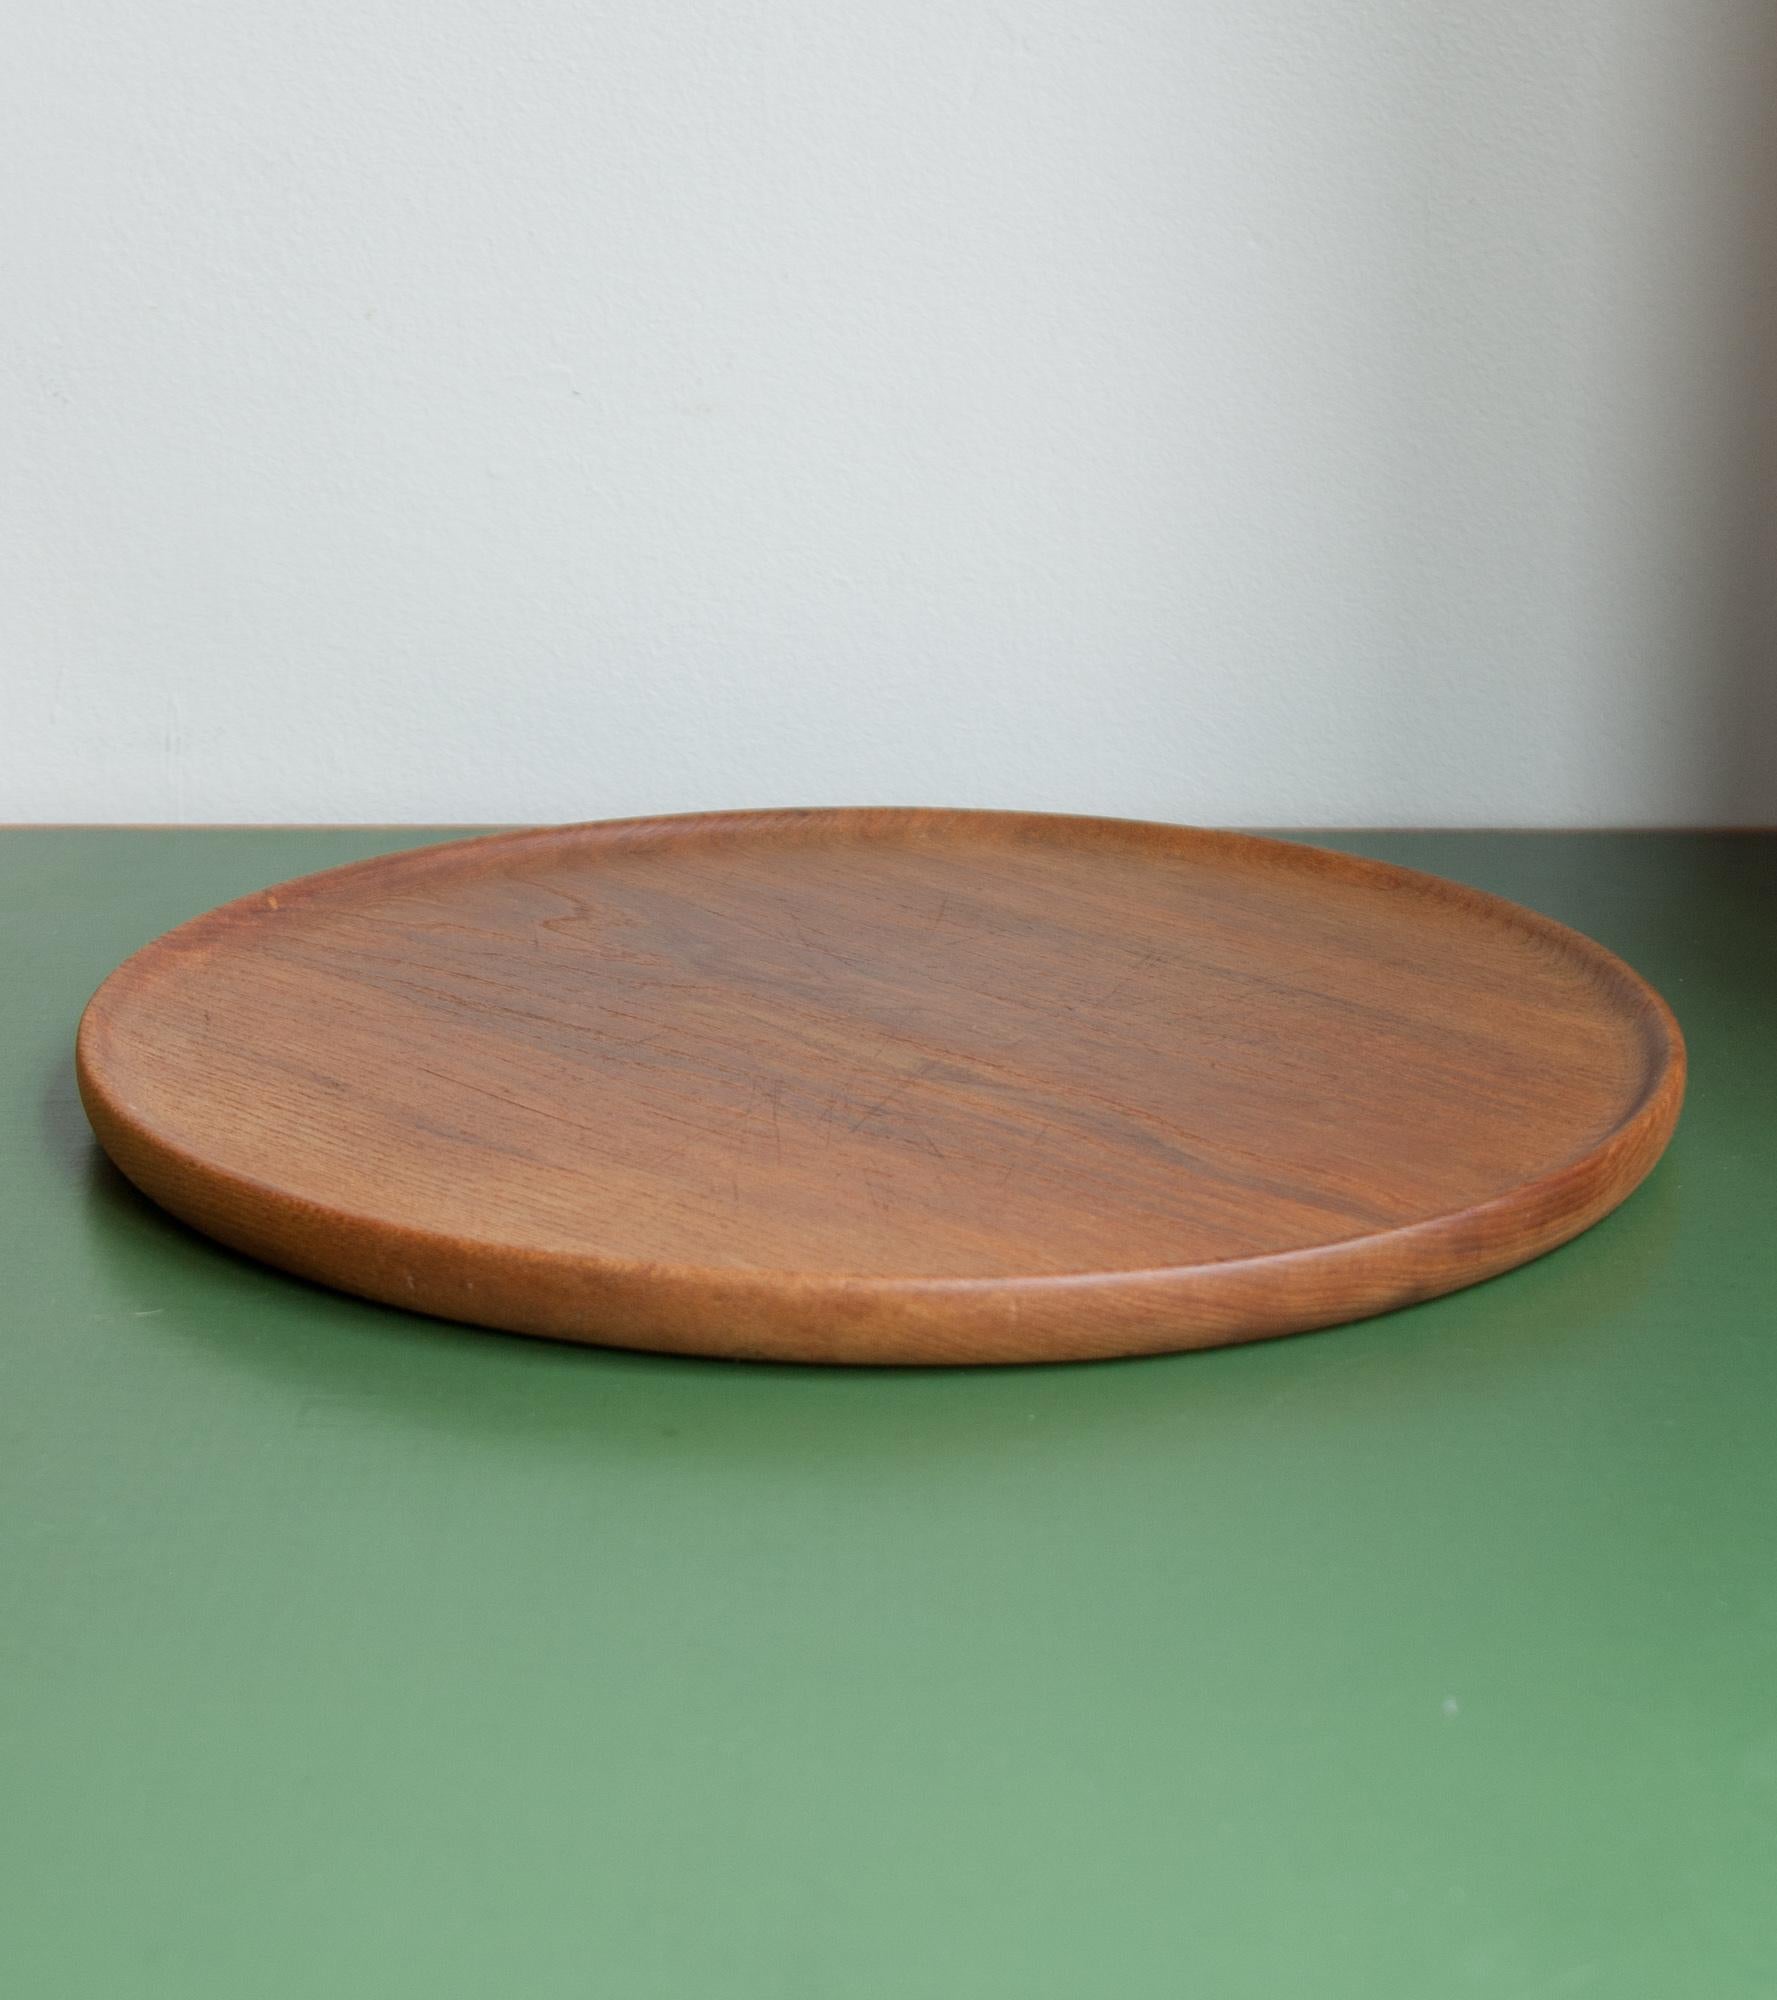 Circular wooden tray by Carl Auböck II, circa 1950.
The minimal tray has a rim tall just 2 mm which adds elegance and functionality to the design.
This piece shows some signs of use and wear due to its age, nevertheless it is in overall very good